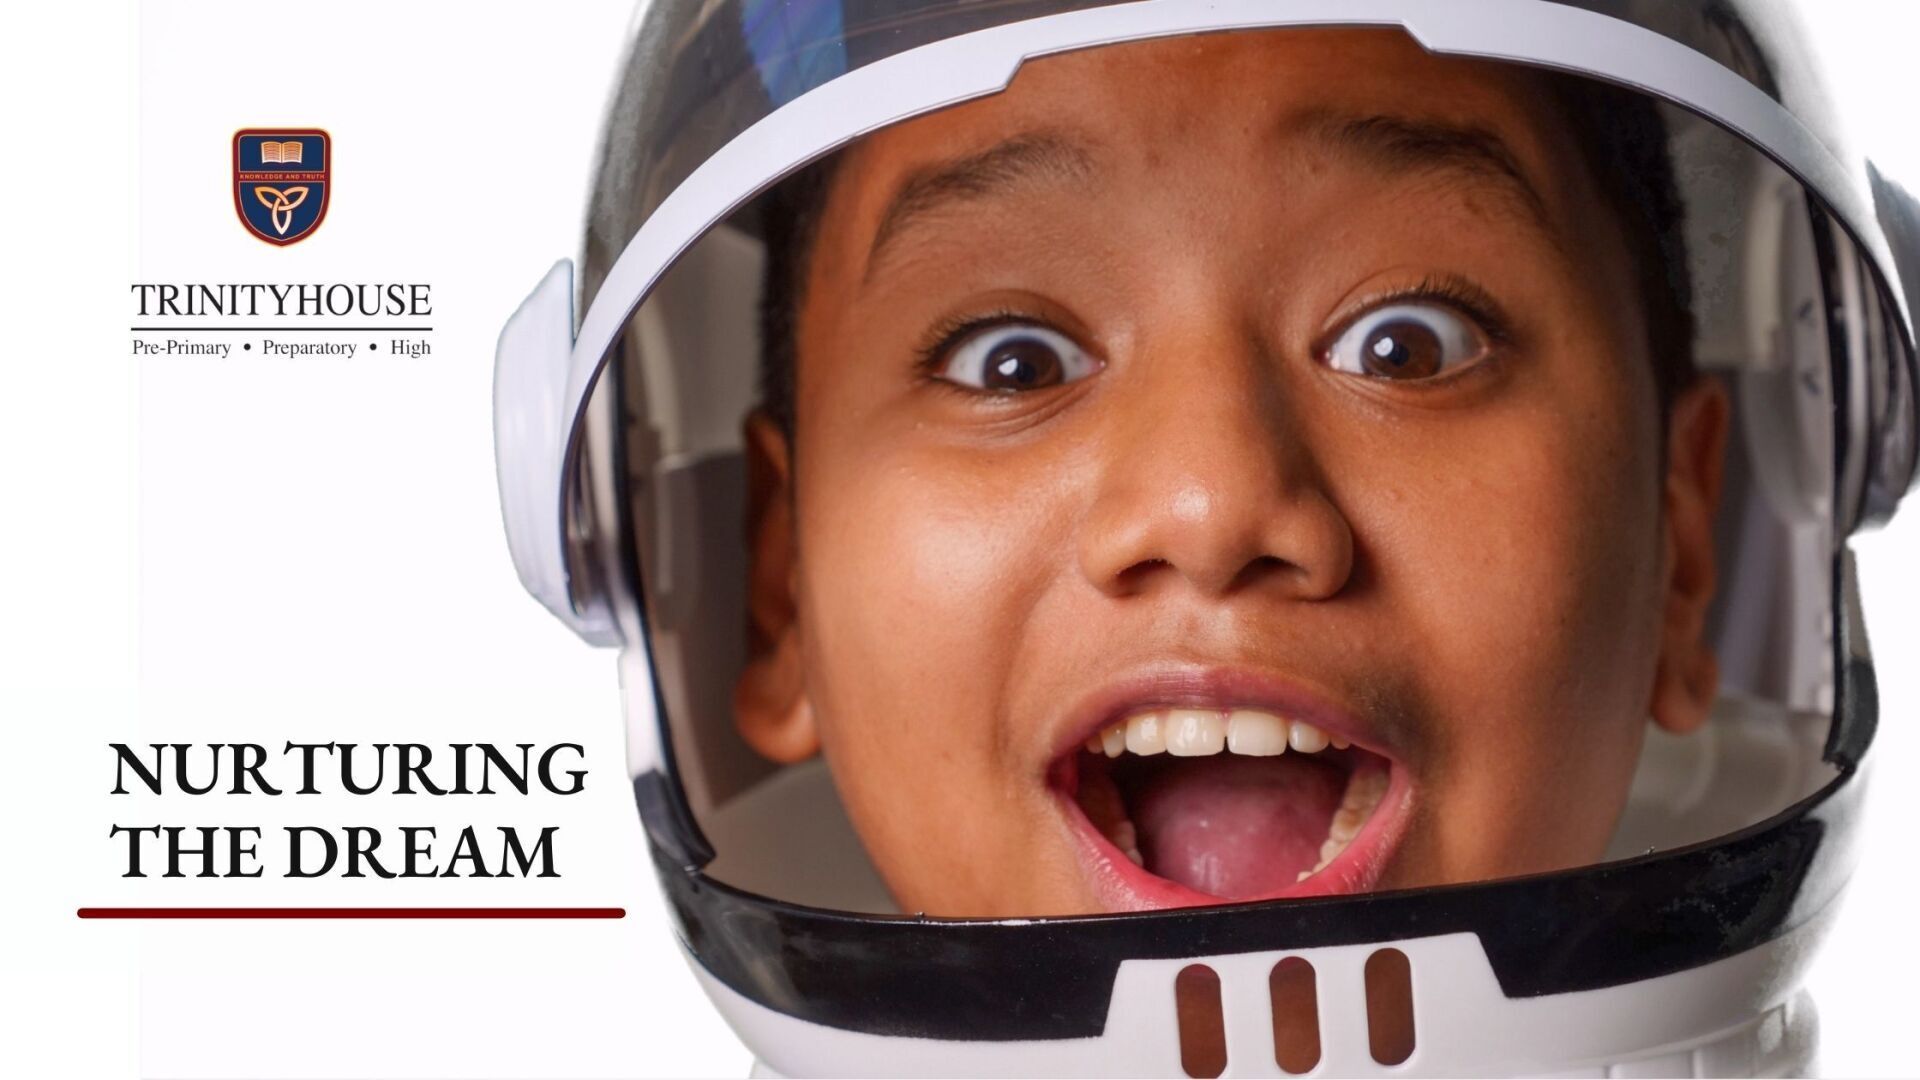 Boy with mouth open with space helmet, his dream career